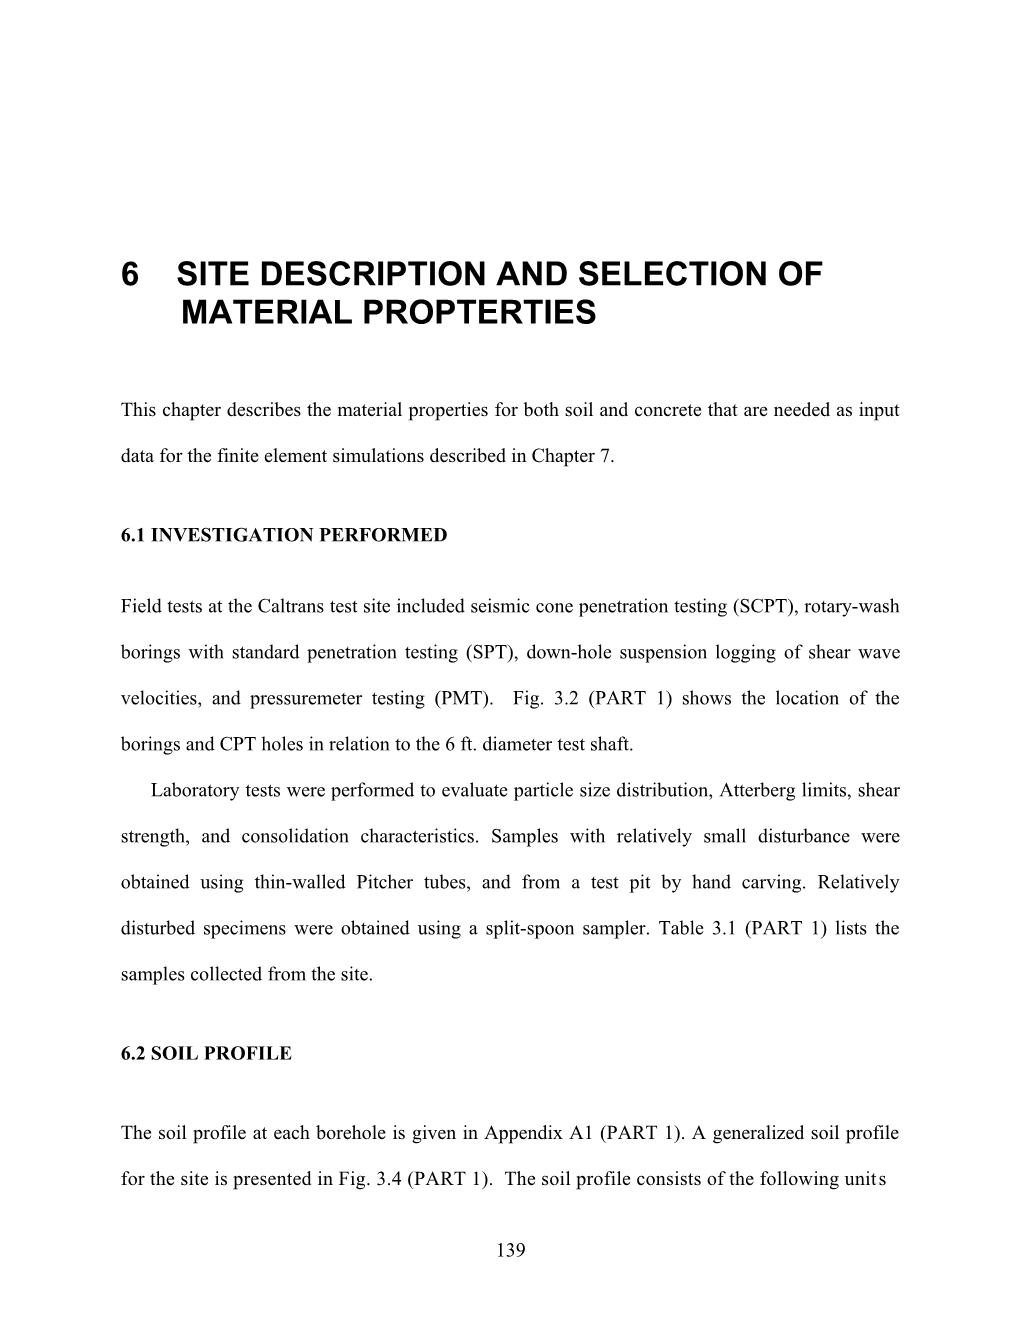 6 Site Description and Selection of Material Propterties